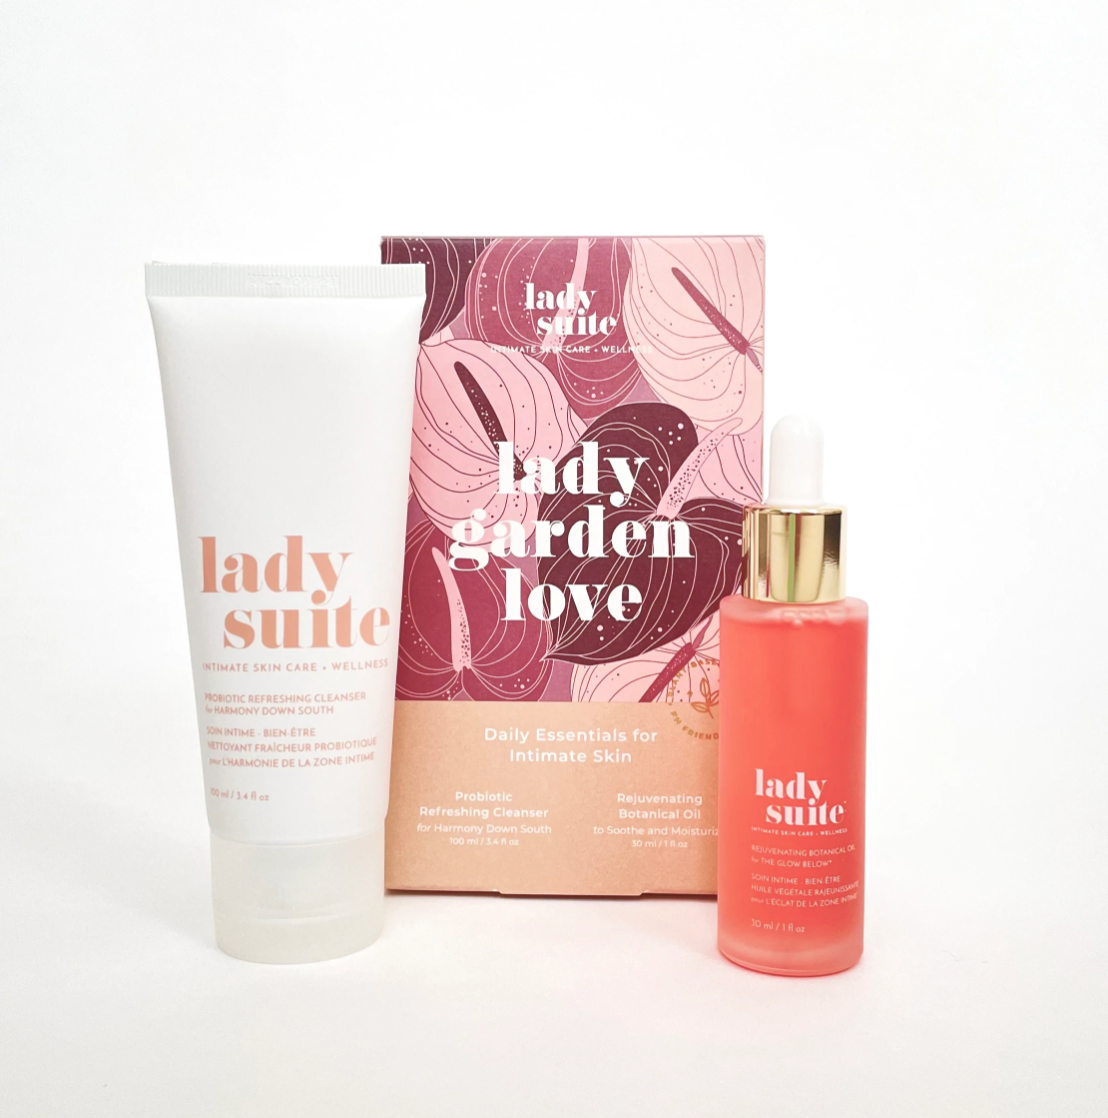 Lady Suite - Lady Garden Love: Daily Essentials